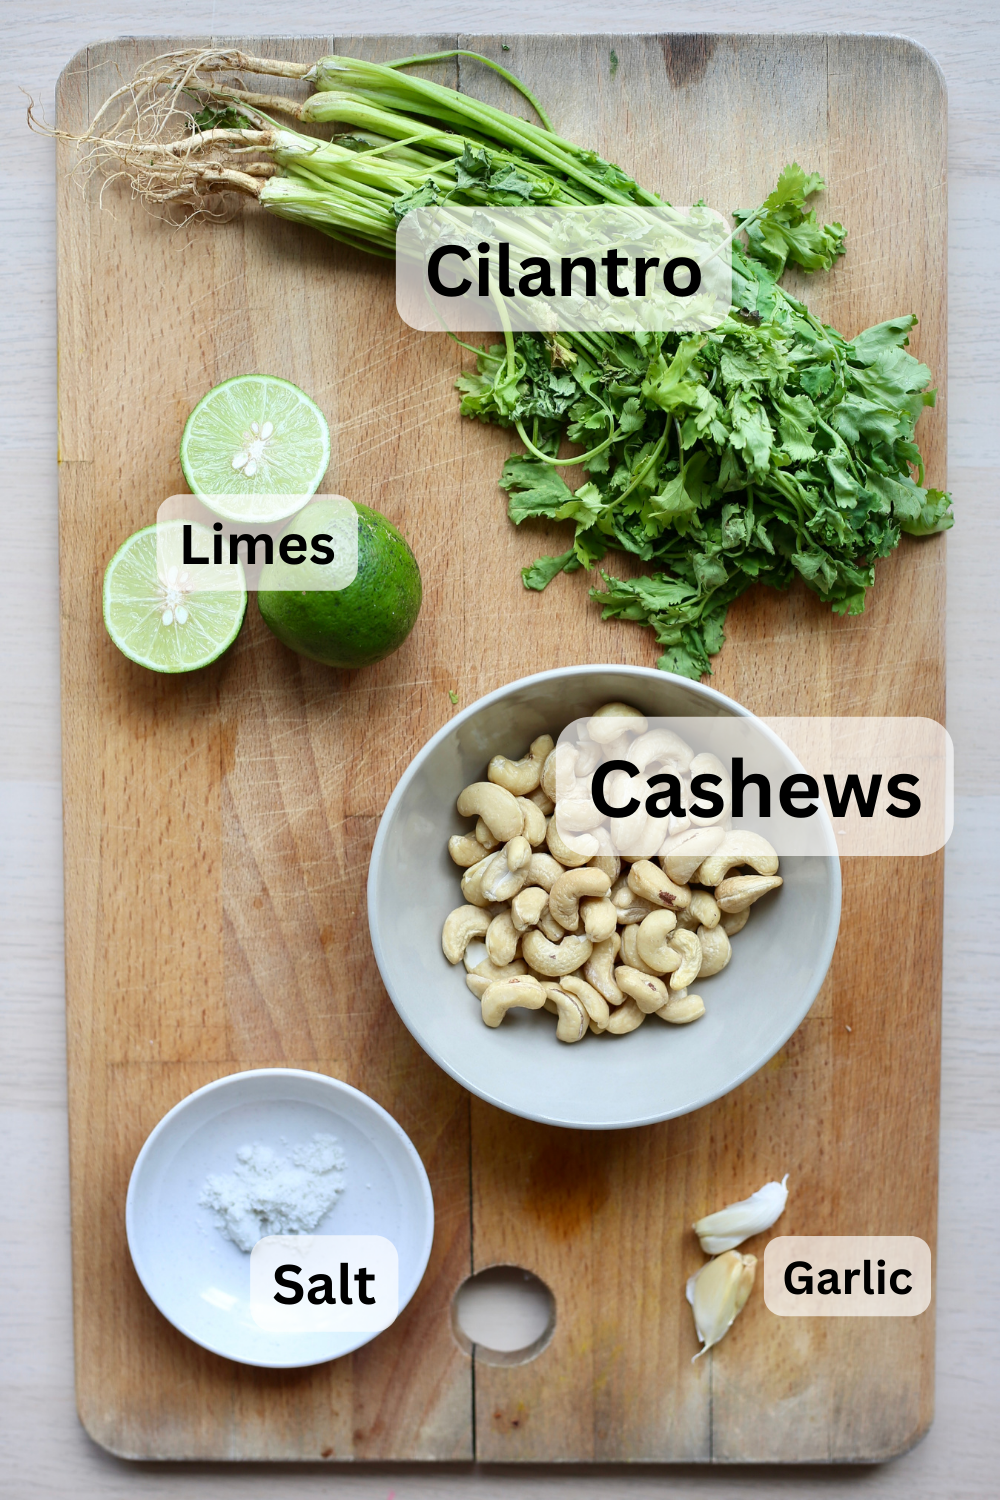 Cilantro, limes, cashews, garlic and salt laid out on a wooden cutting board.